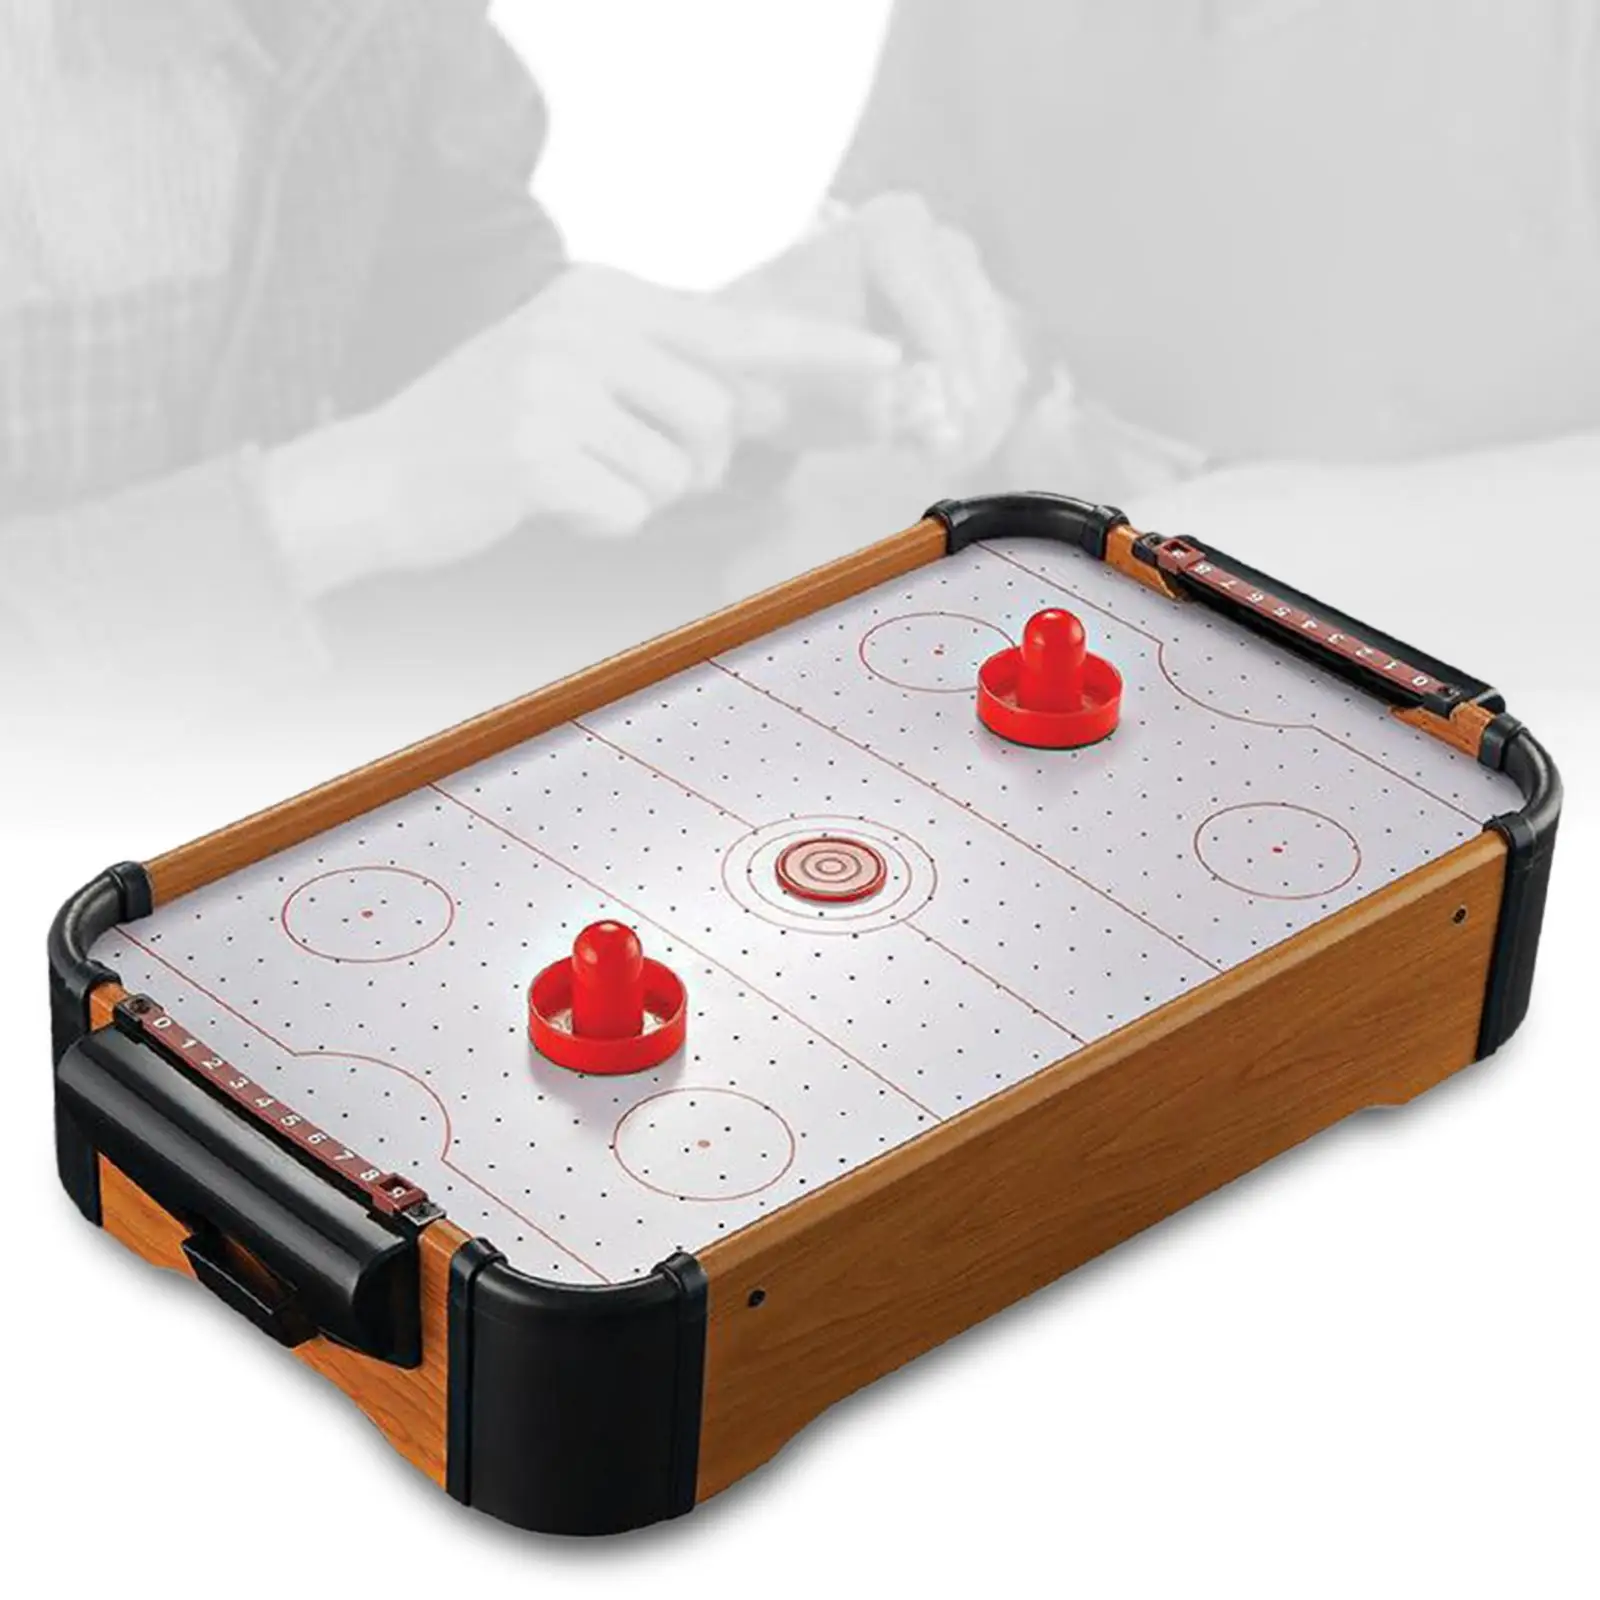 Cute Hockey Game Set Tabletop Football Board family Sport Game Educational Toys Tabletop Air Hockey for Adults Kids